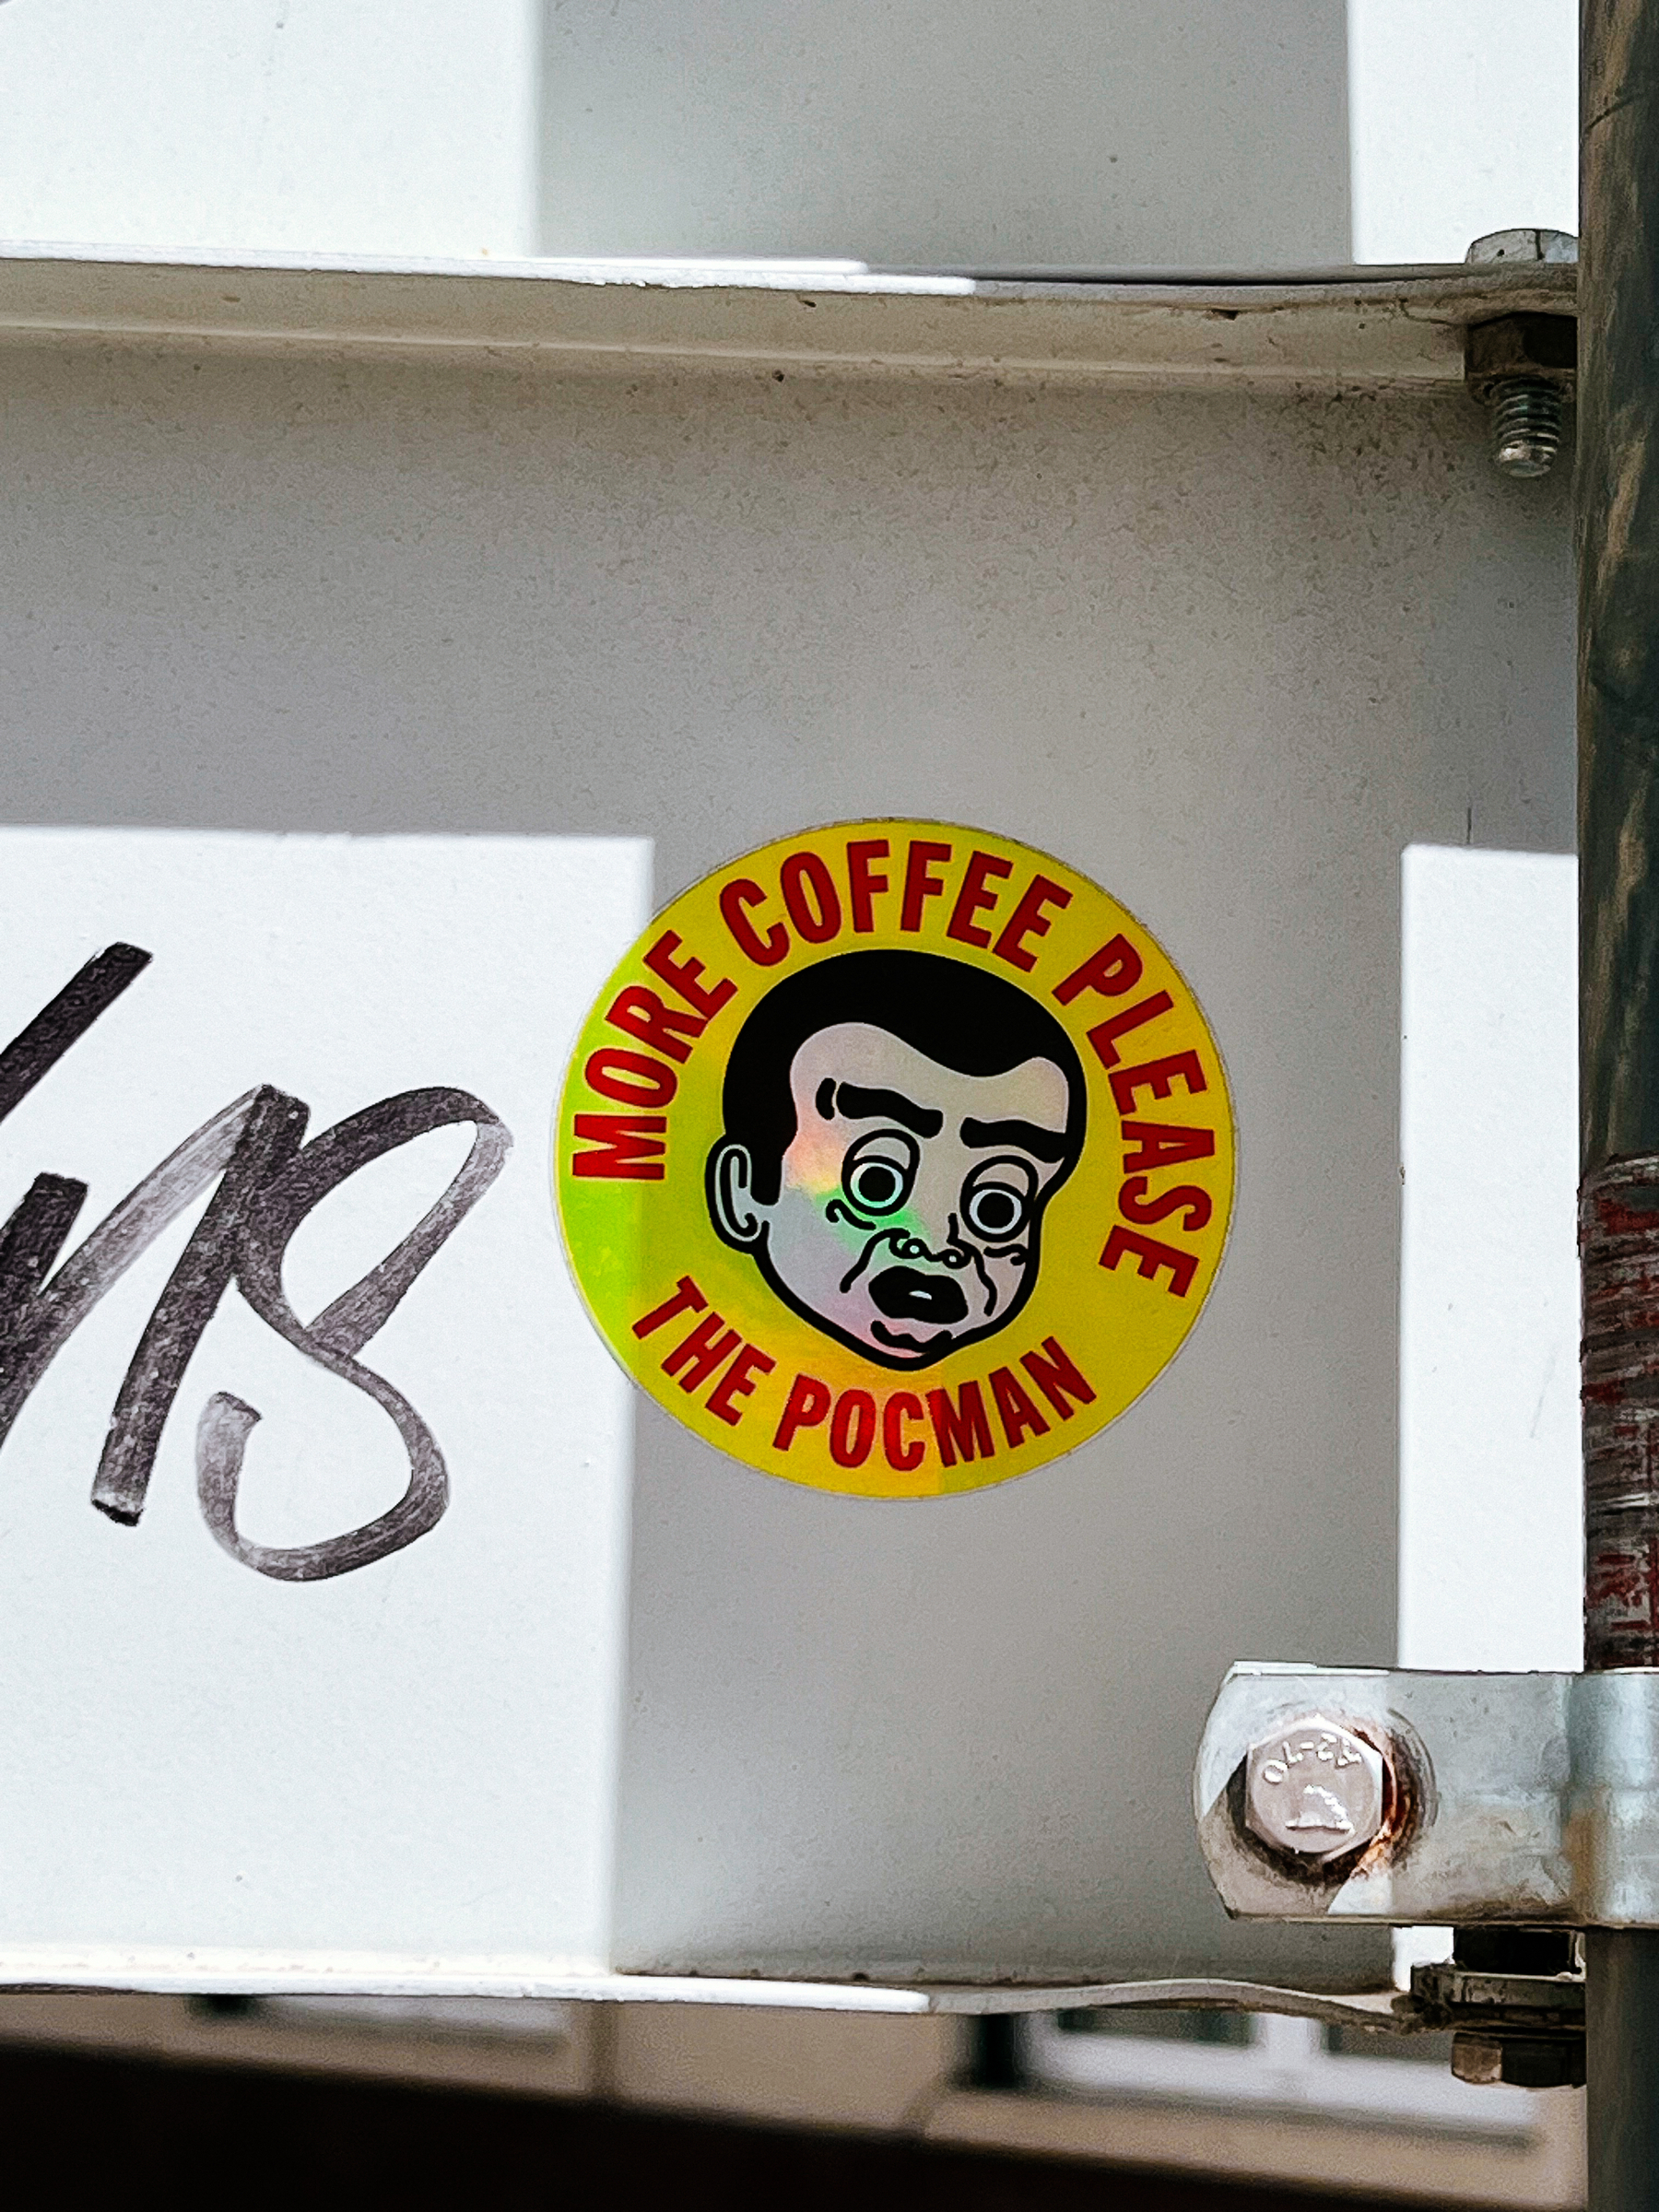 “More coffee please. The Pocman”. And a face. On a sticker. 